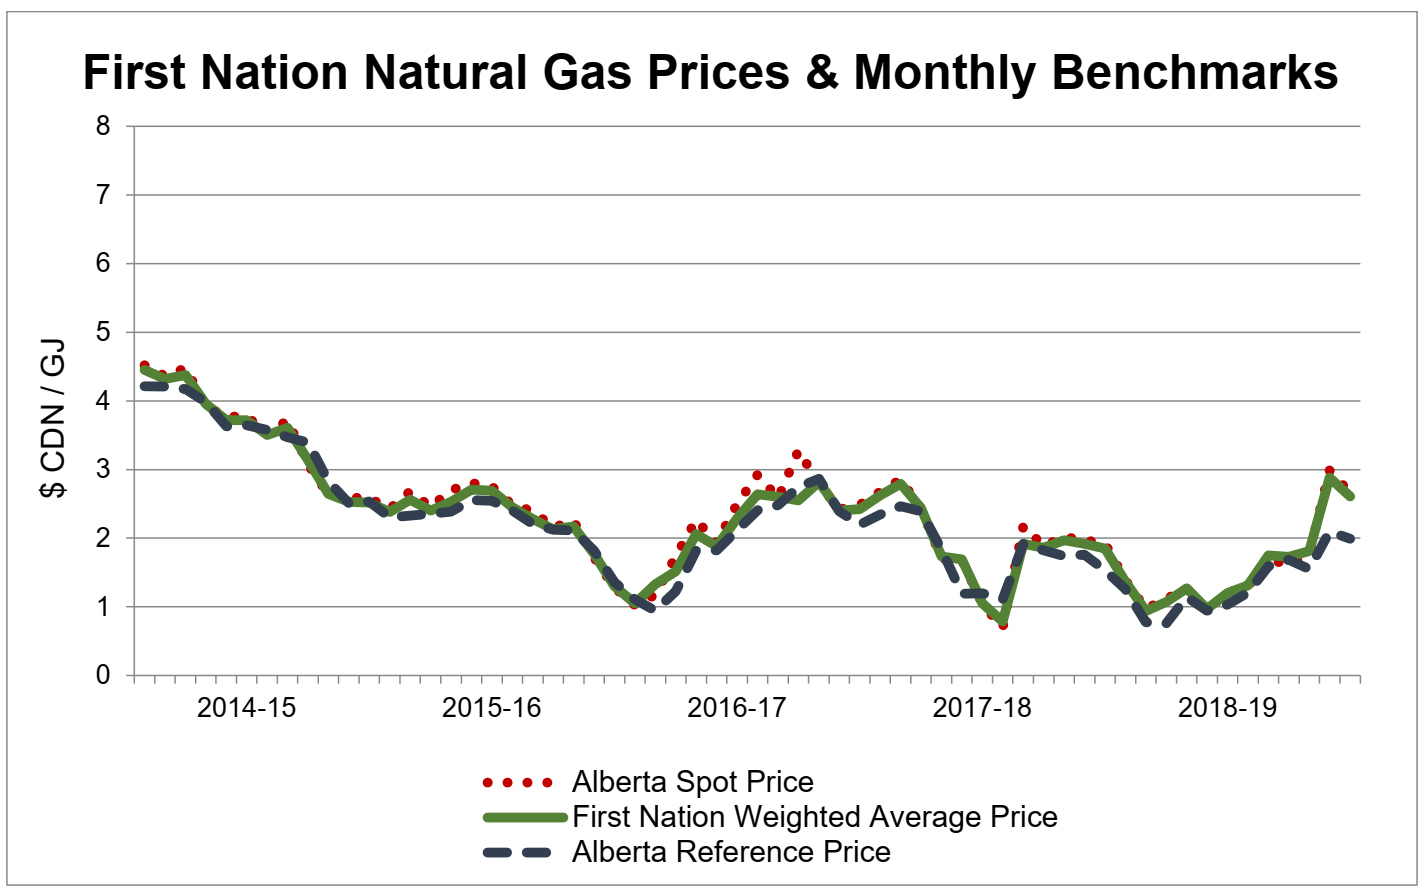 First Nation Natural Gas Prices & Monthly Benchmarks